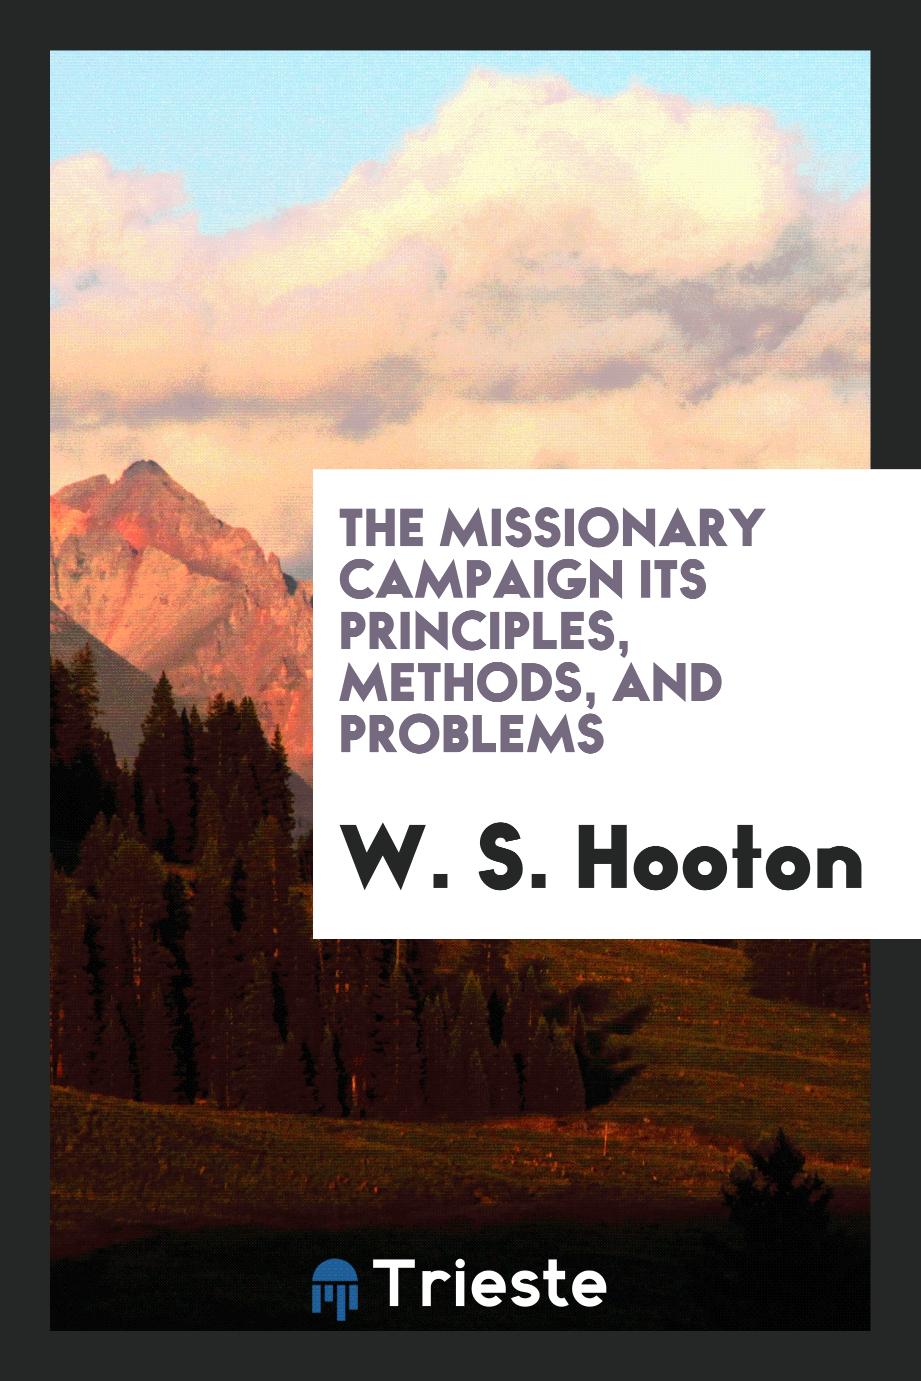 The missionary campaign its principles, methods, and problems